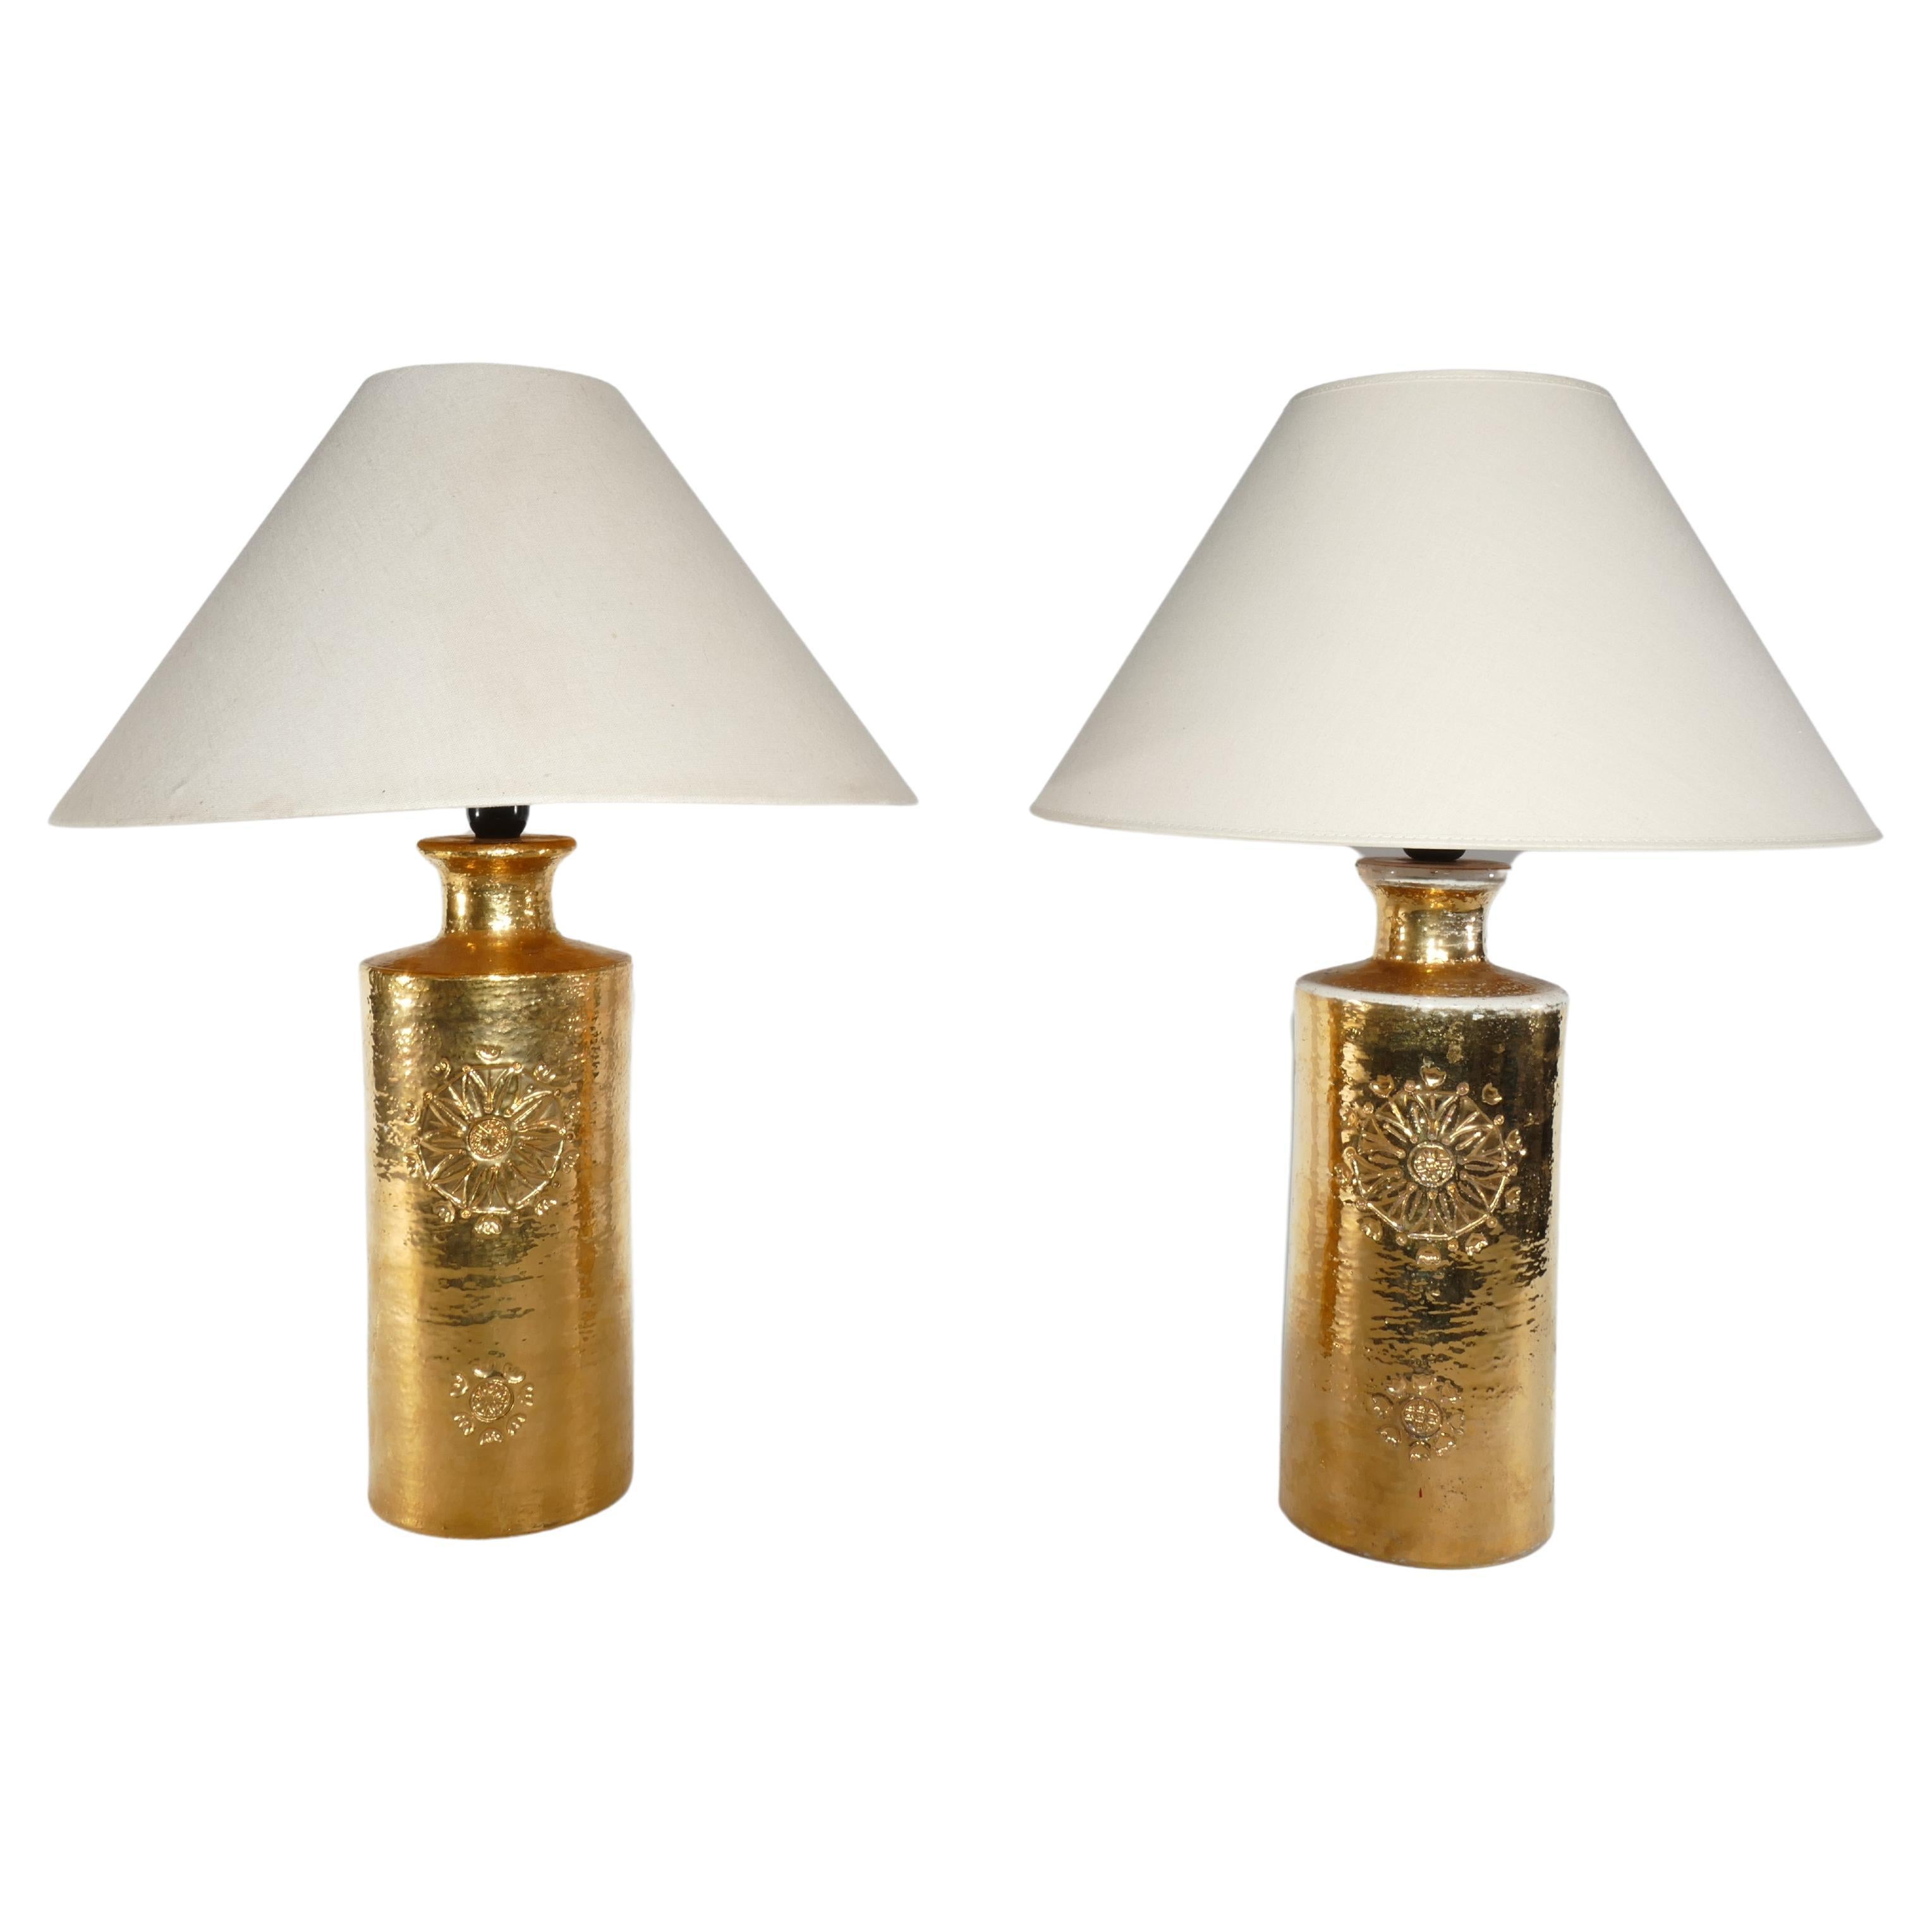 Gold Glazed Ceramic Table Lamps by Bitossi for Bergboms, Set of 2, 1970's